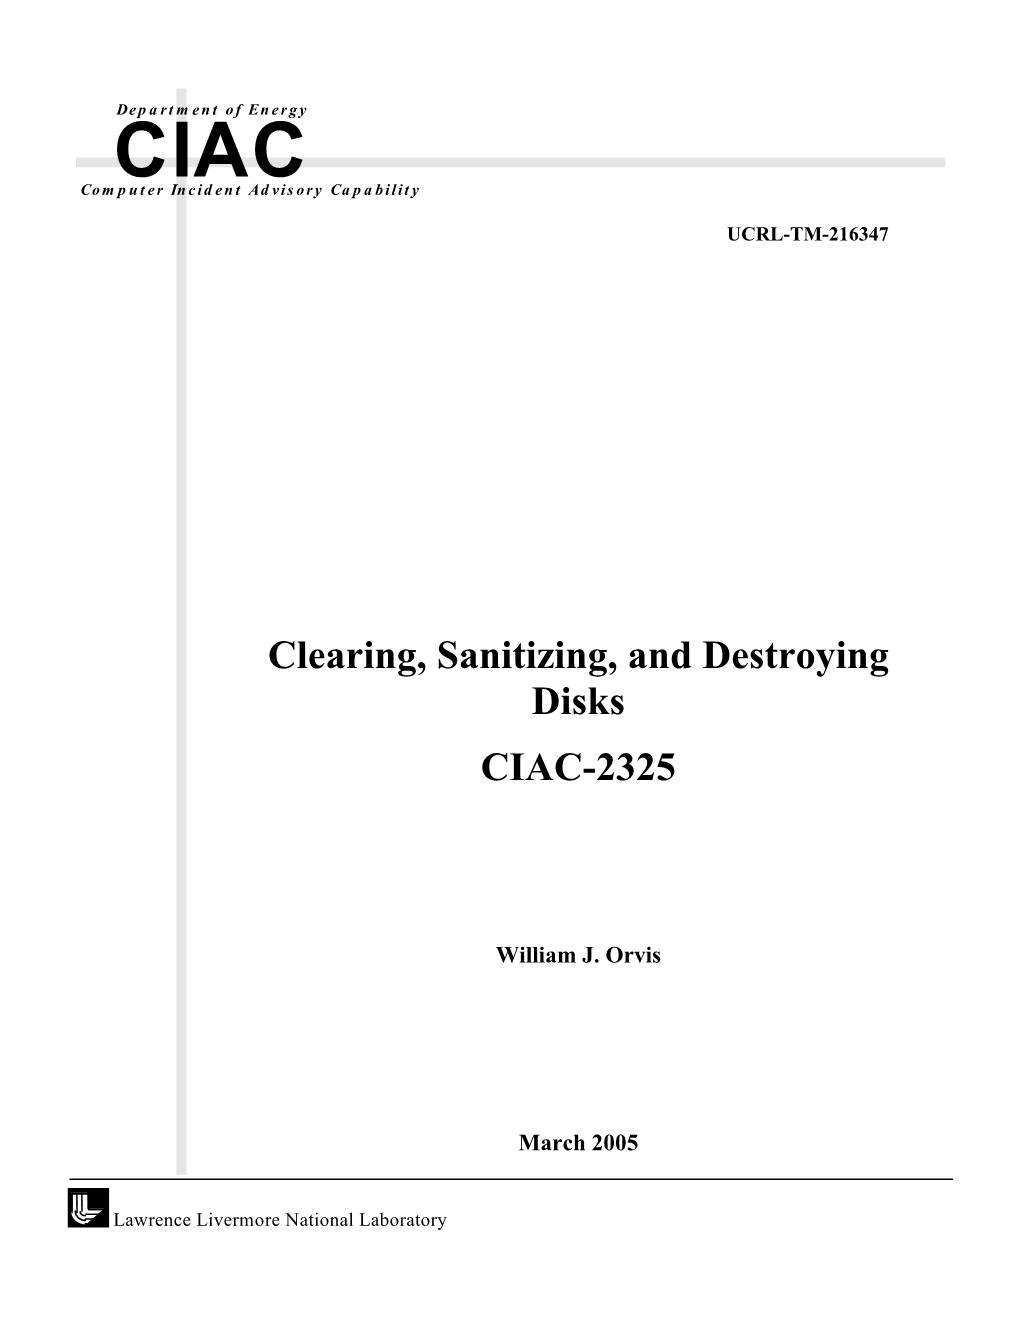 Clearing, Sanitizing, and Destroying Disks CIAC-2325